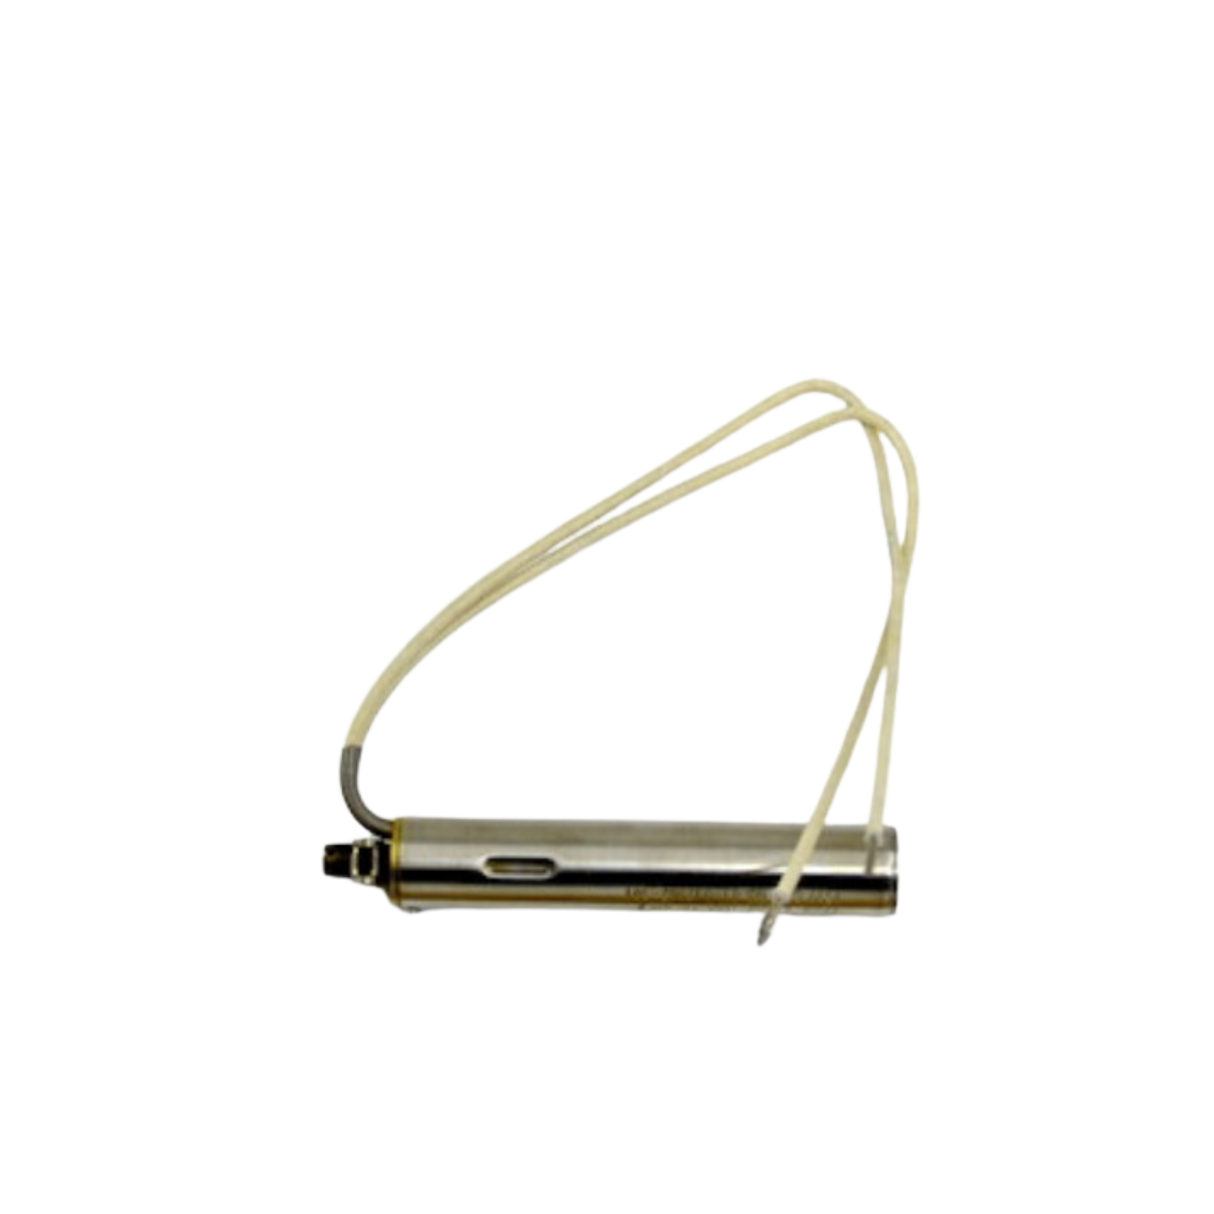 Fenwal 01-017002-301 Brass Shell and Head, 0.625" Diameter, Cartridge, Thermoswitch Temperature Control with 10" Wire Leads and Locking Temperature Restraining Device